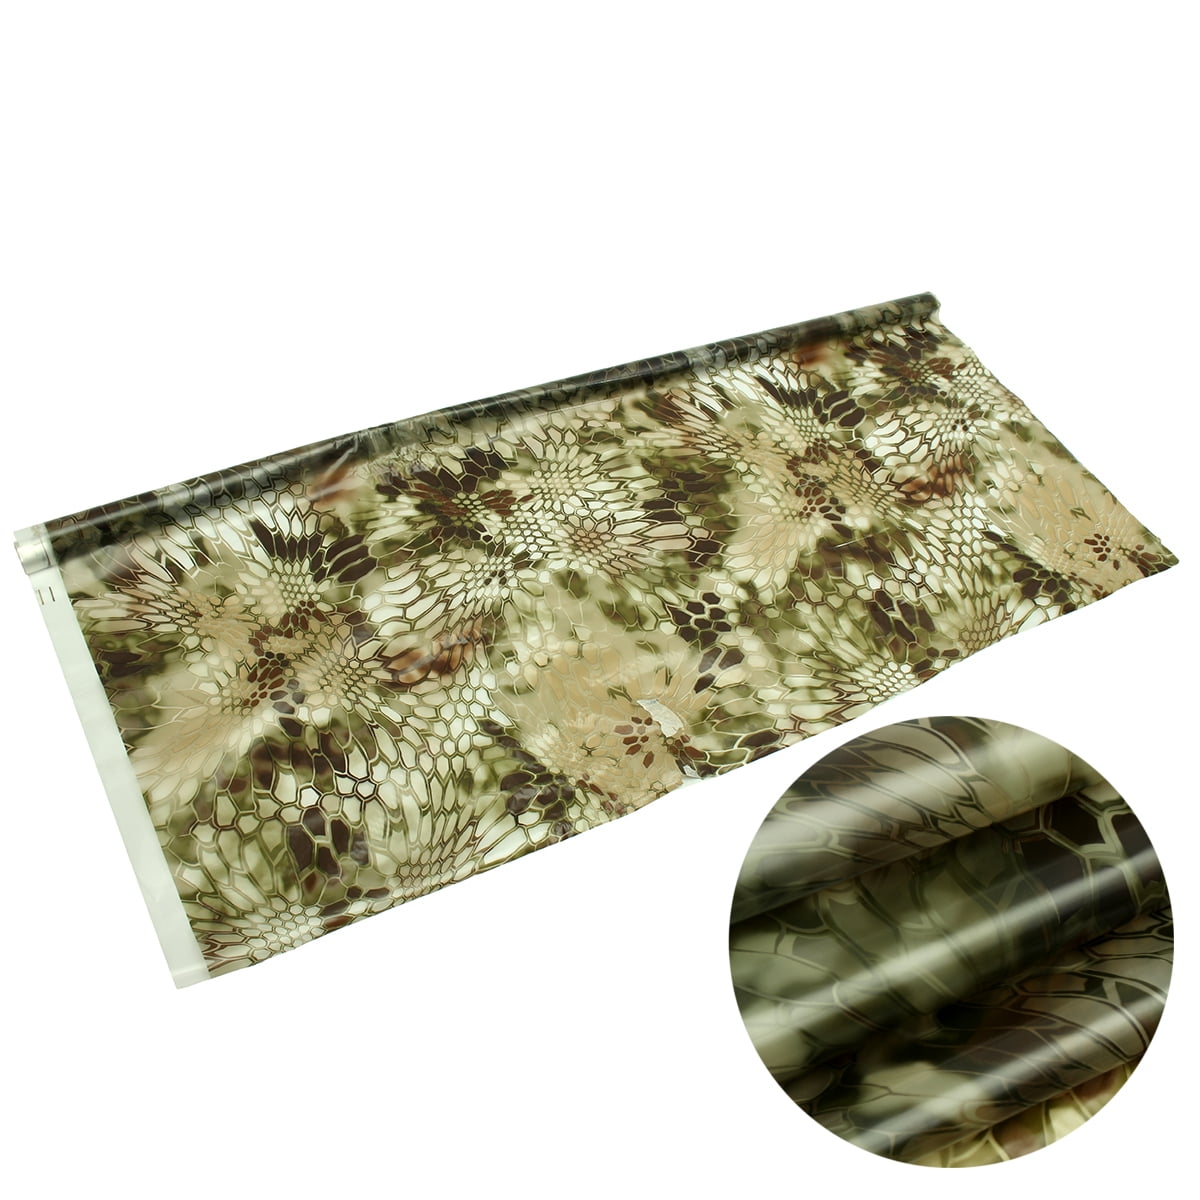 Camouflag PVA film Hydrographics Water Transfer Printing 0.5x2m colorful dip